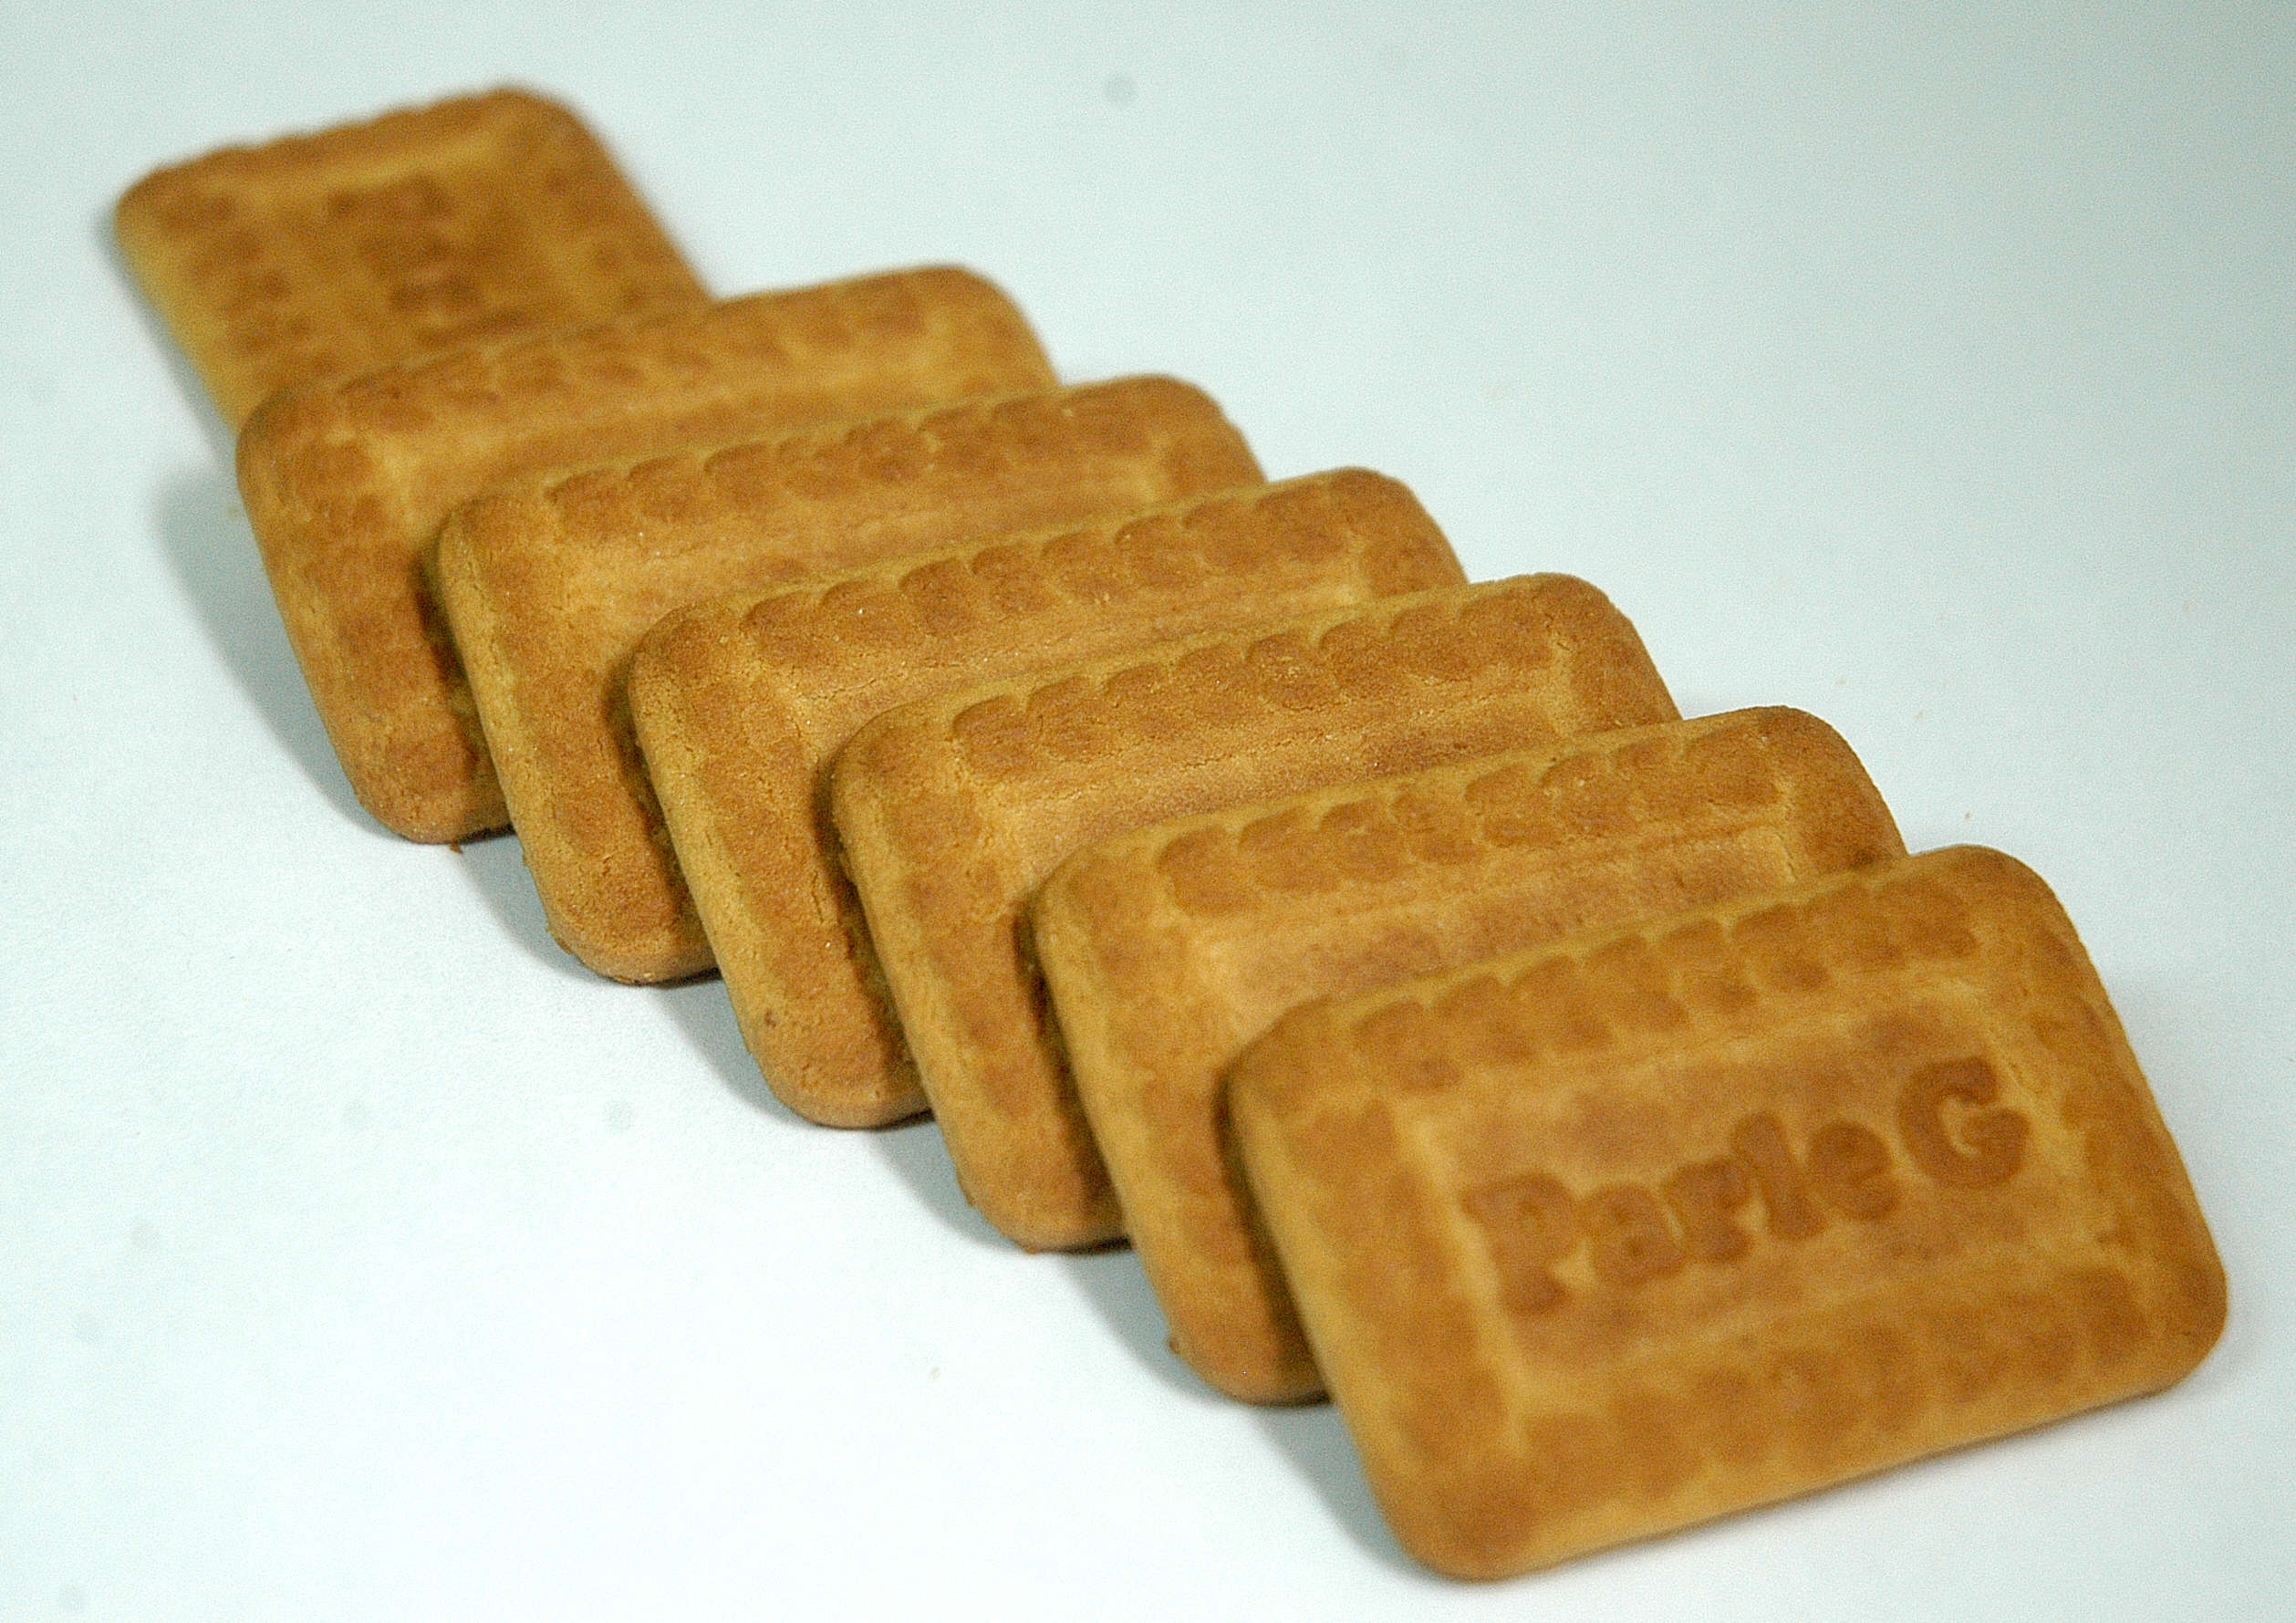 How Parle-G continues to exceed its sales record despite a recession